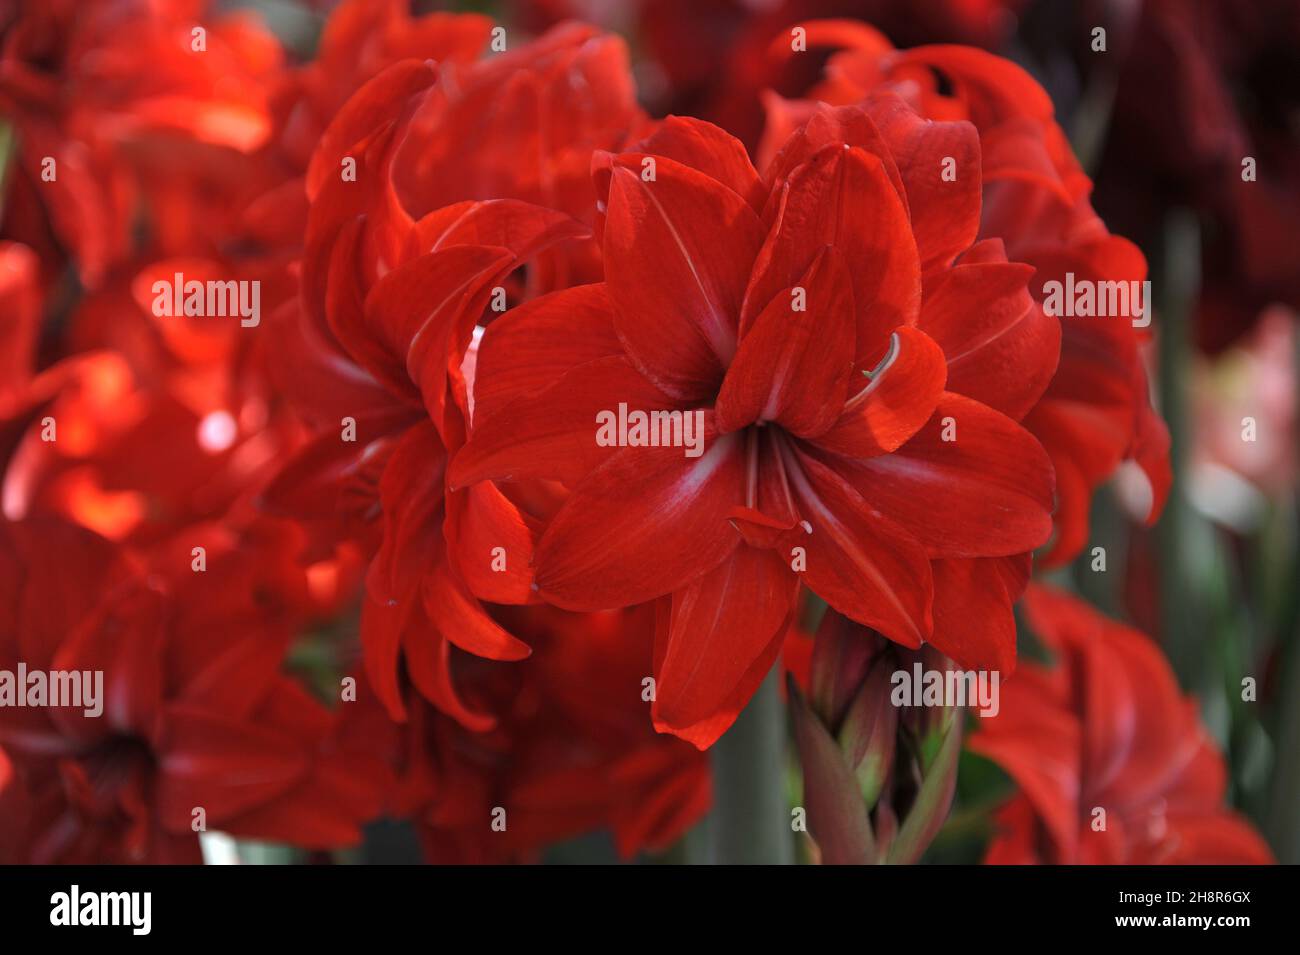 Red double-flowered hippeastrum (Amaryllis) Double Delicious blooms in a garden in April Stock Photo